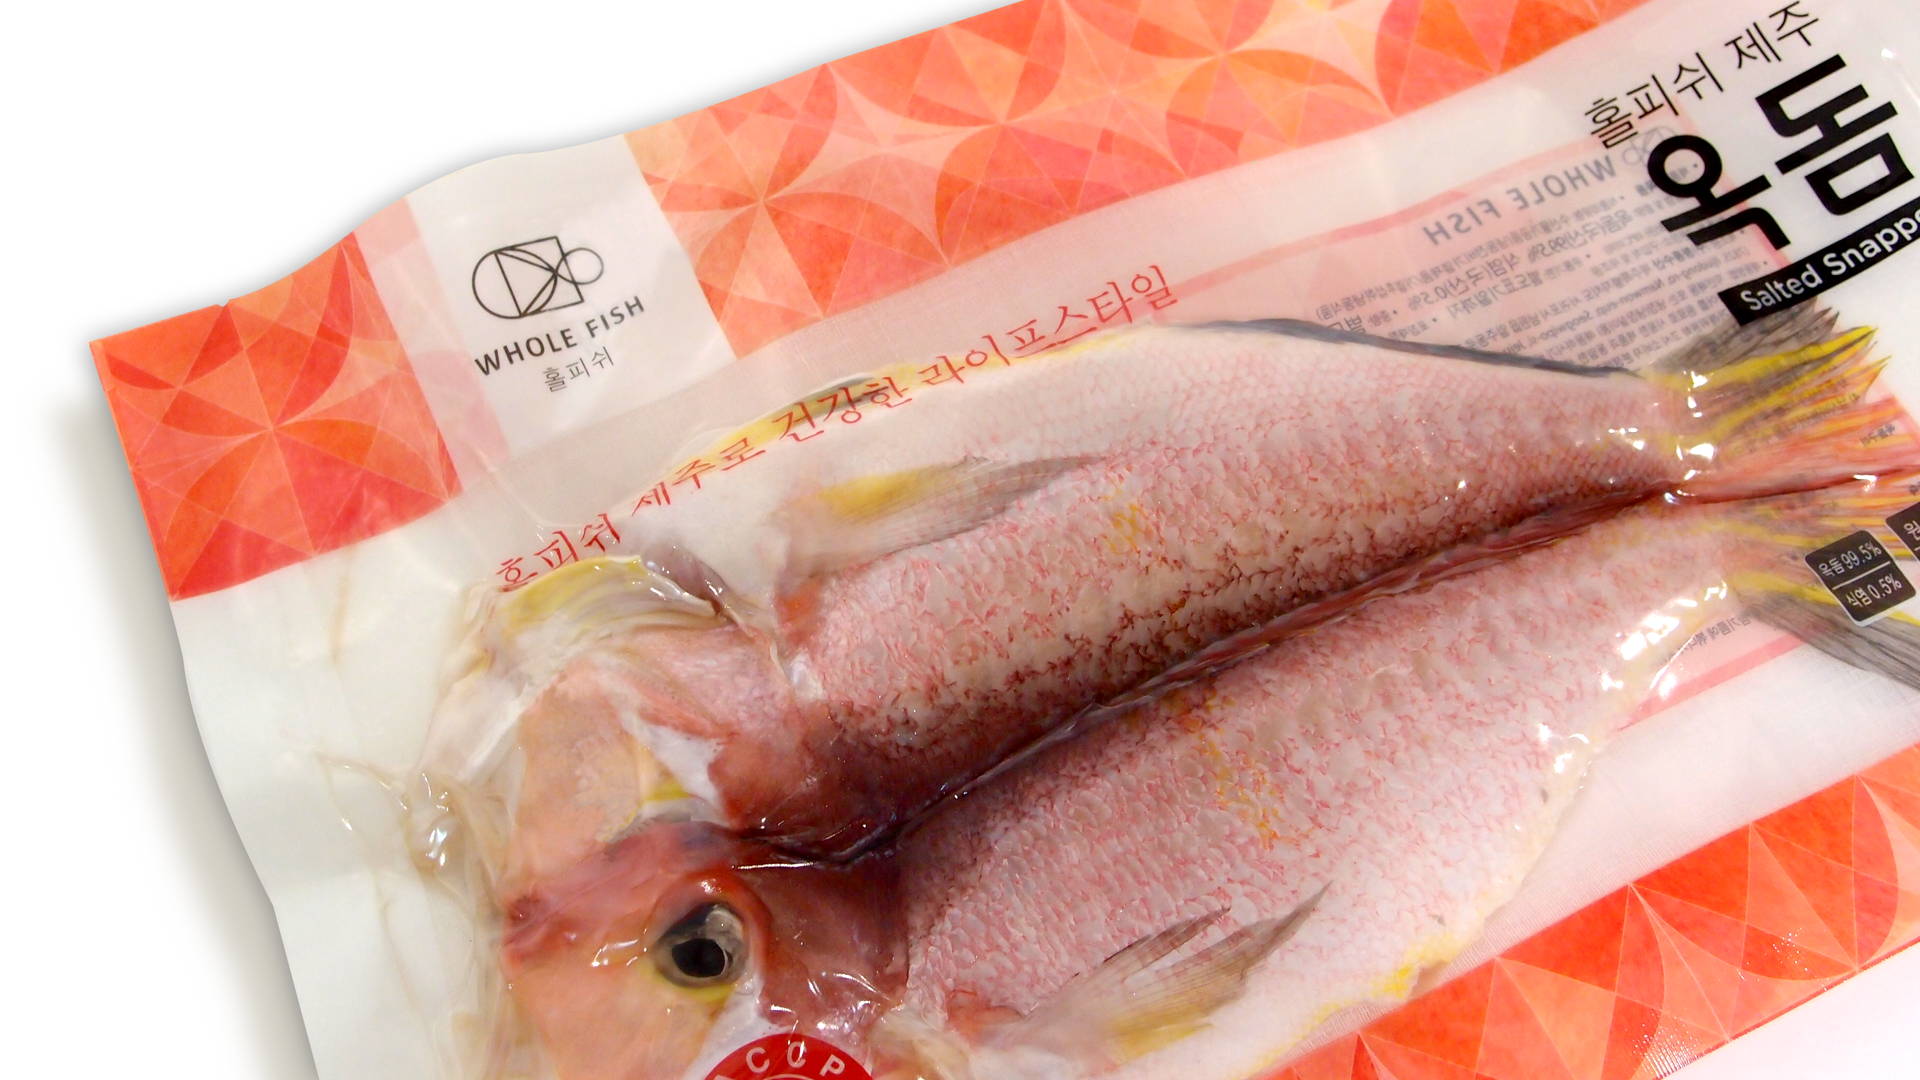 Featured image for Whole Fish, A Frozen Fish Brand